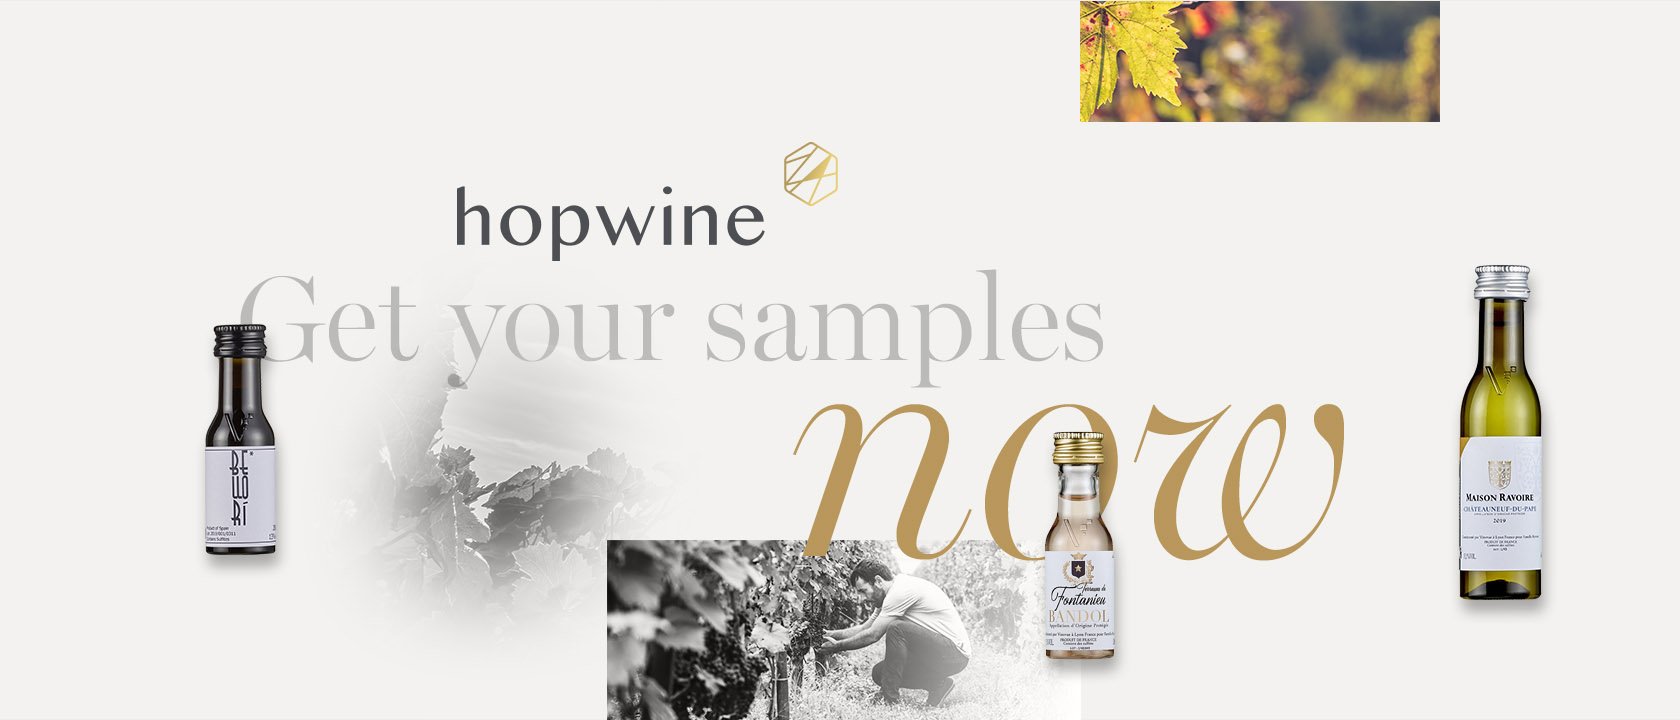 Hopwine Get your samples now